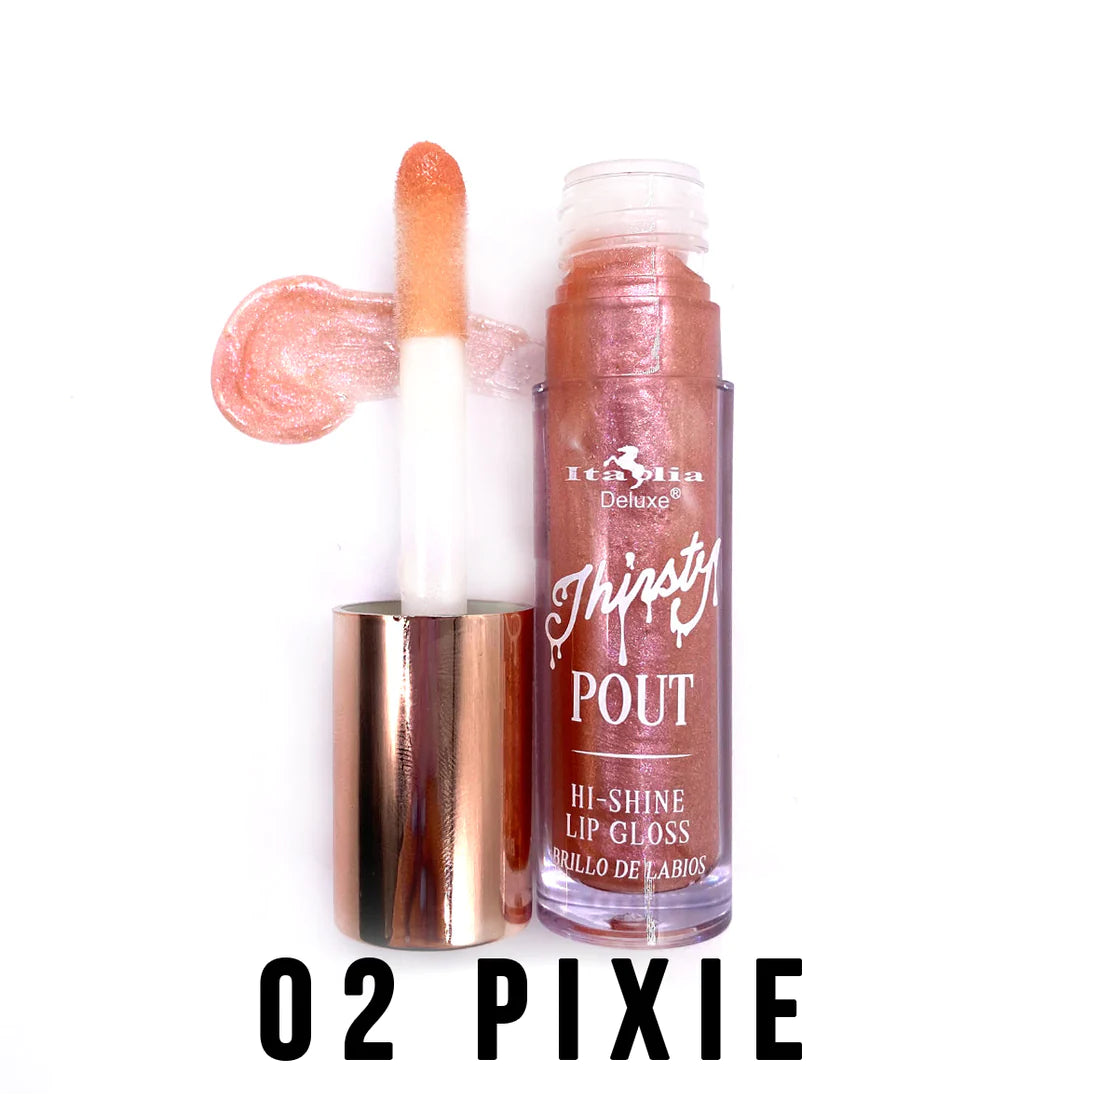 Thirsty Pout Hi-Shine Lip Gloss - Italia Deluxe